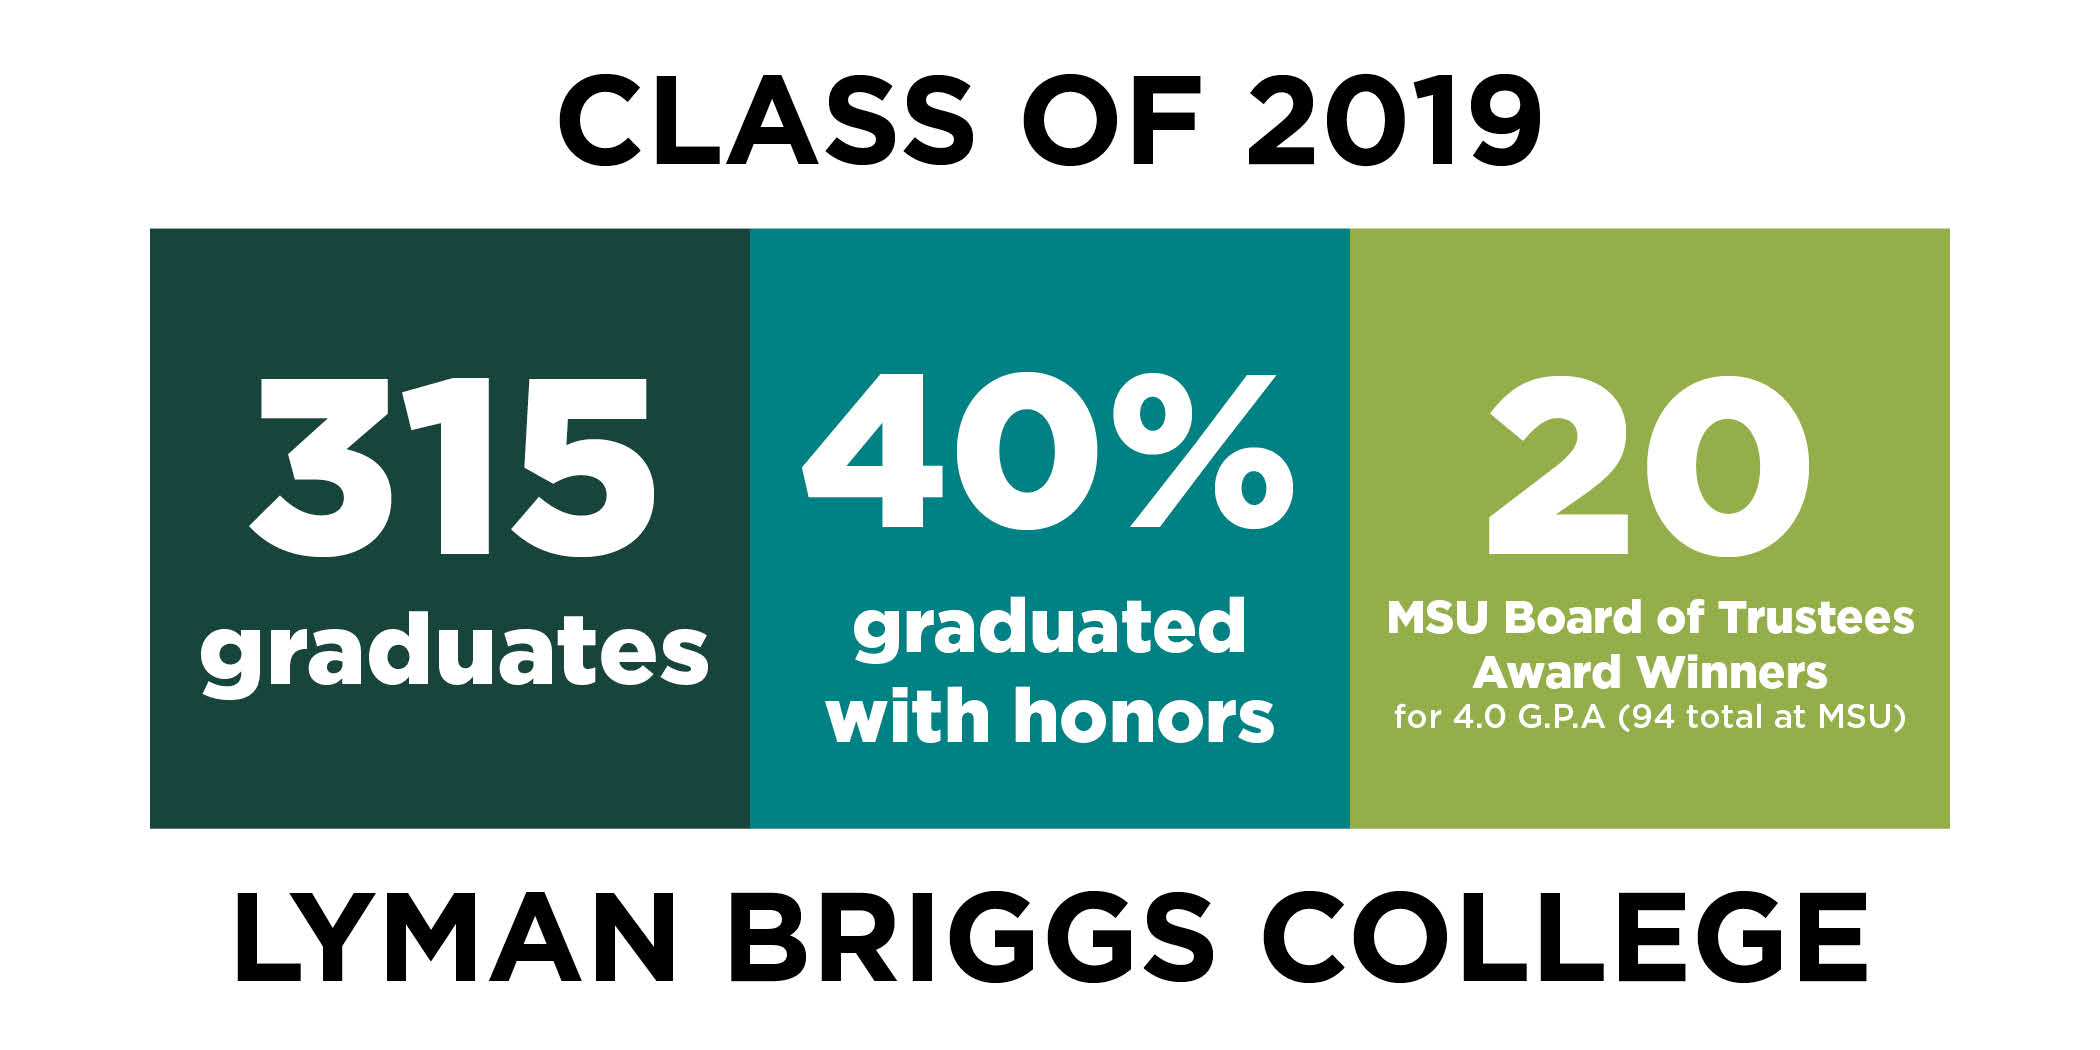 Spring 2019 Commencement at a Glance